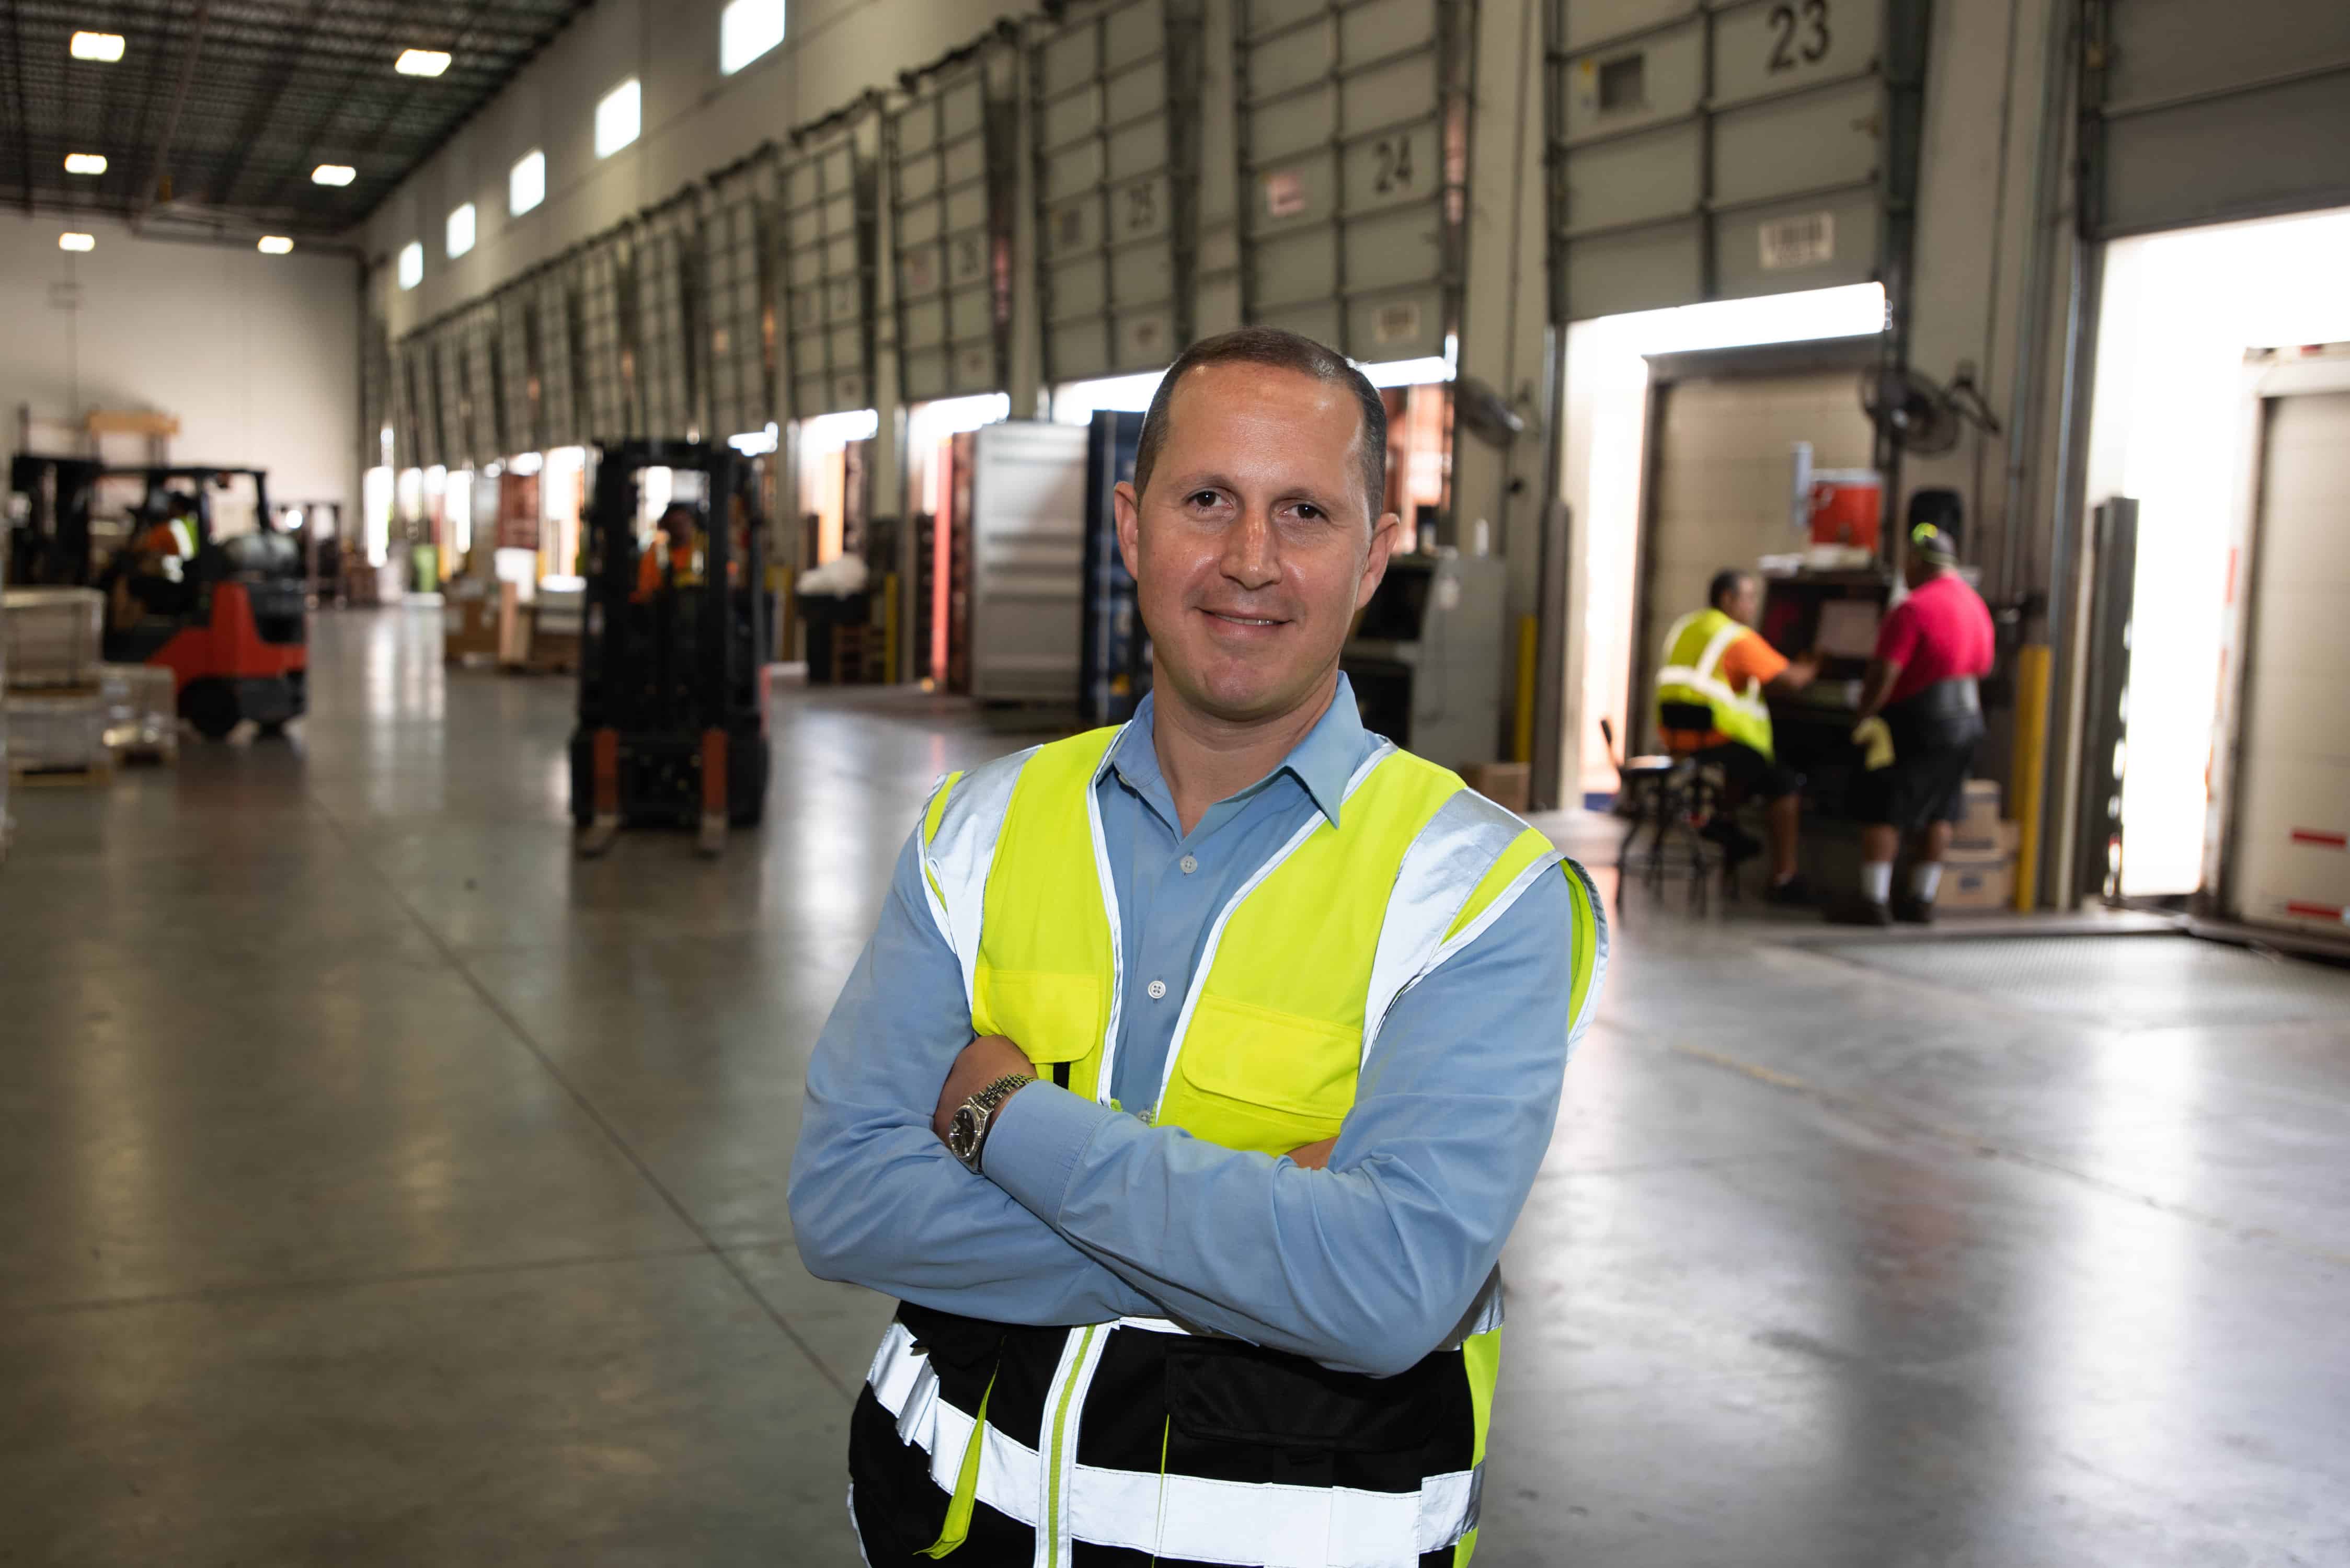 Dipietropolo wears a yellow reflective vest inside a Tropical warehouse.